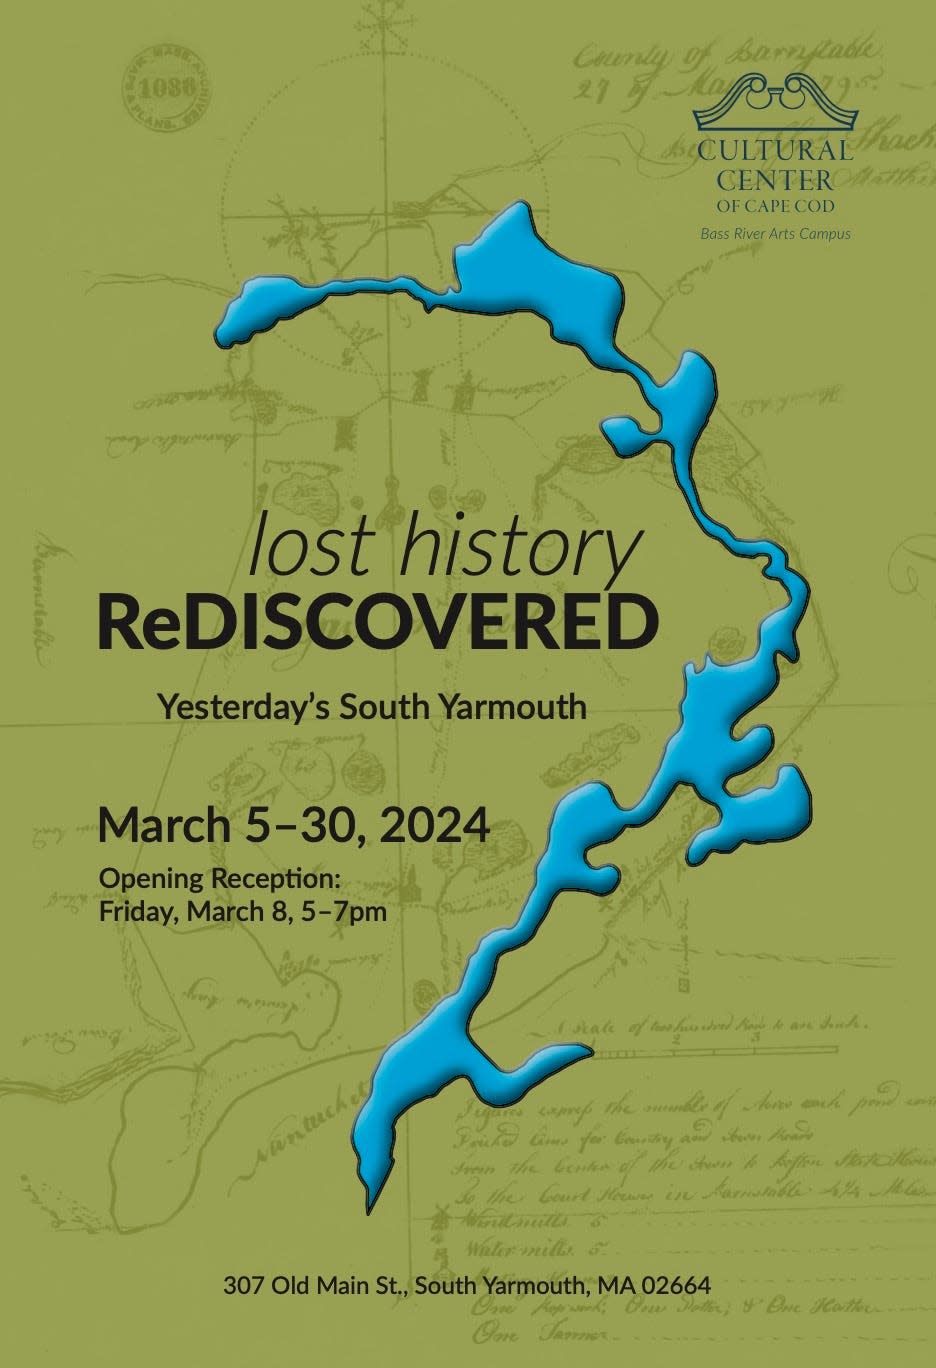 Poster for "Lost History - Rediscovered," an exhibition on the history of the Bass River and Yarmouth area at the Cultural Center of Cape Cod.